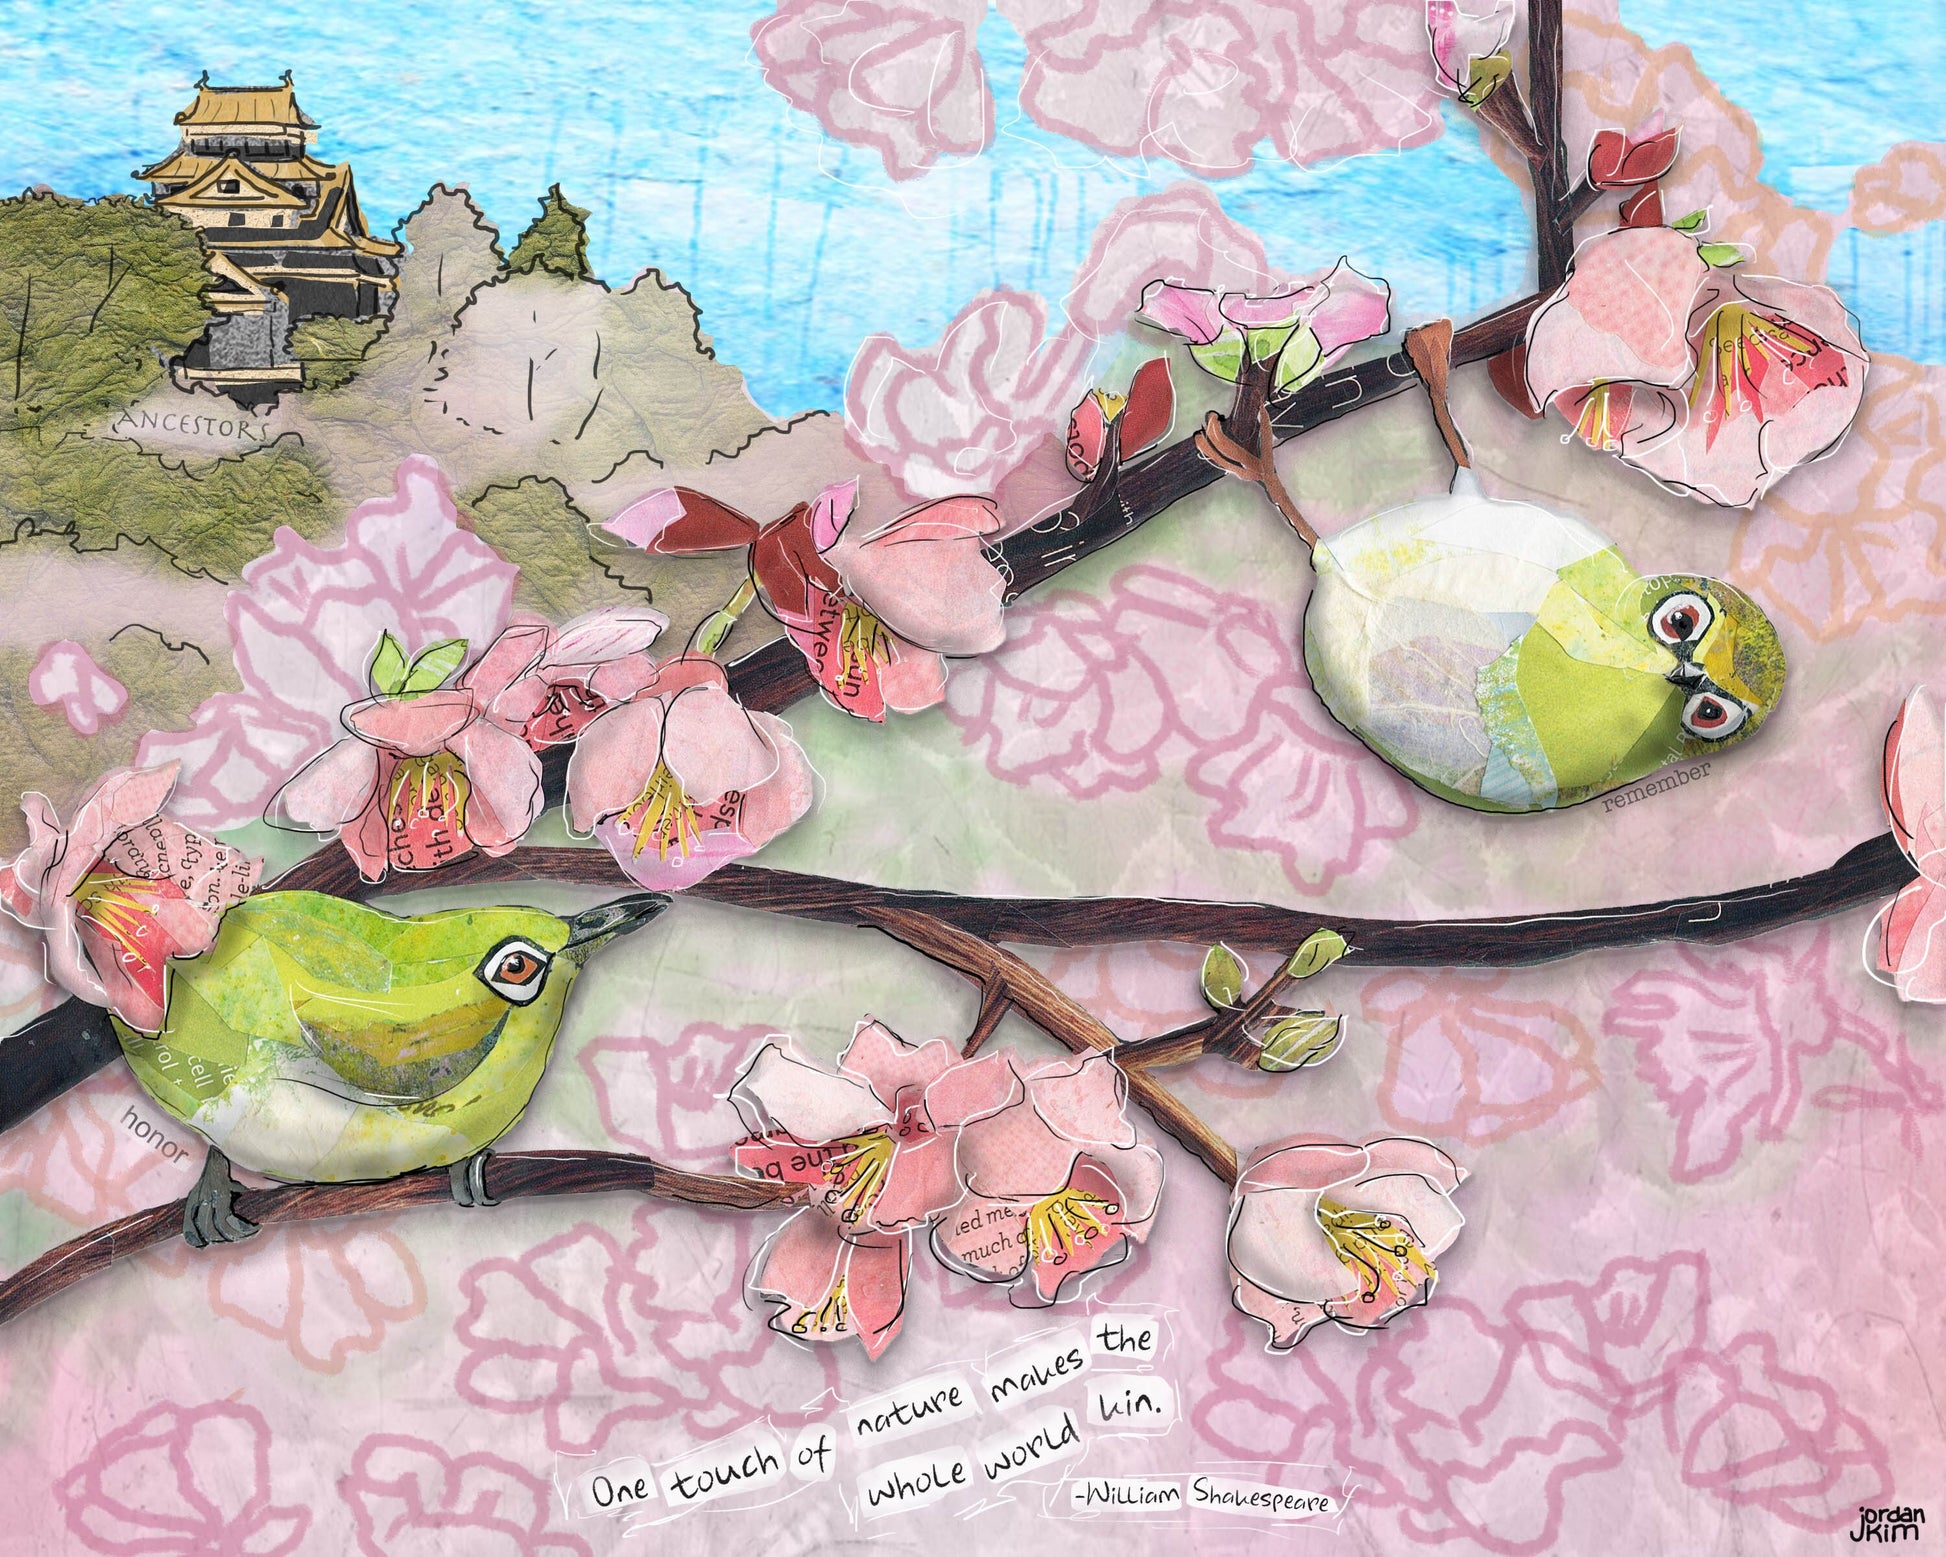 Greeting Card of mixed media collage of Japanese White-Eye birds in sakura cherry blossoms, temple, Shakespeare quote - Blank Inside